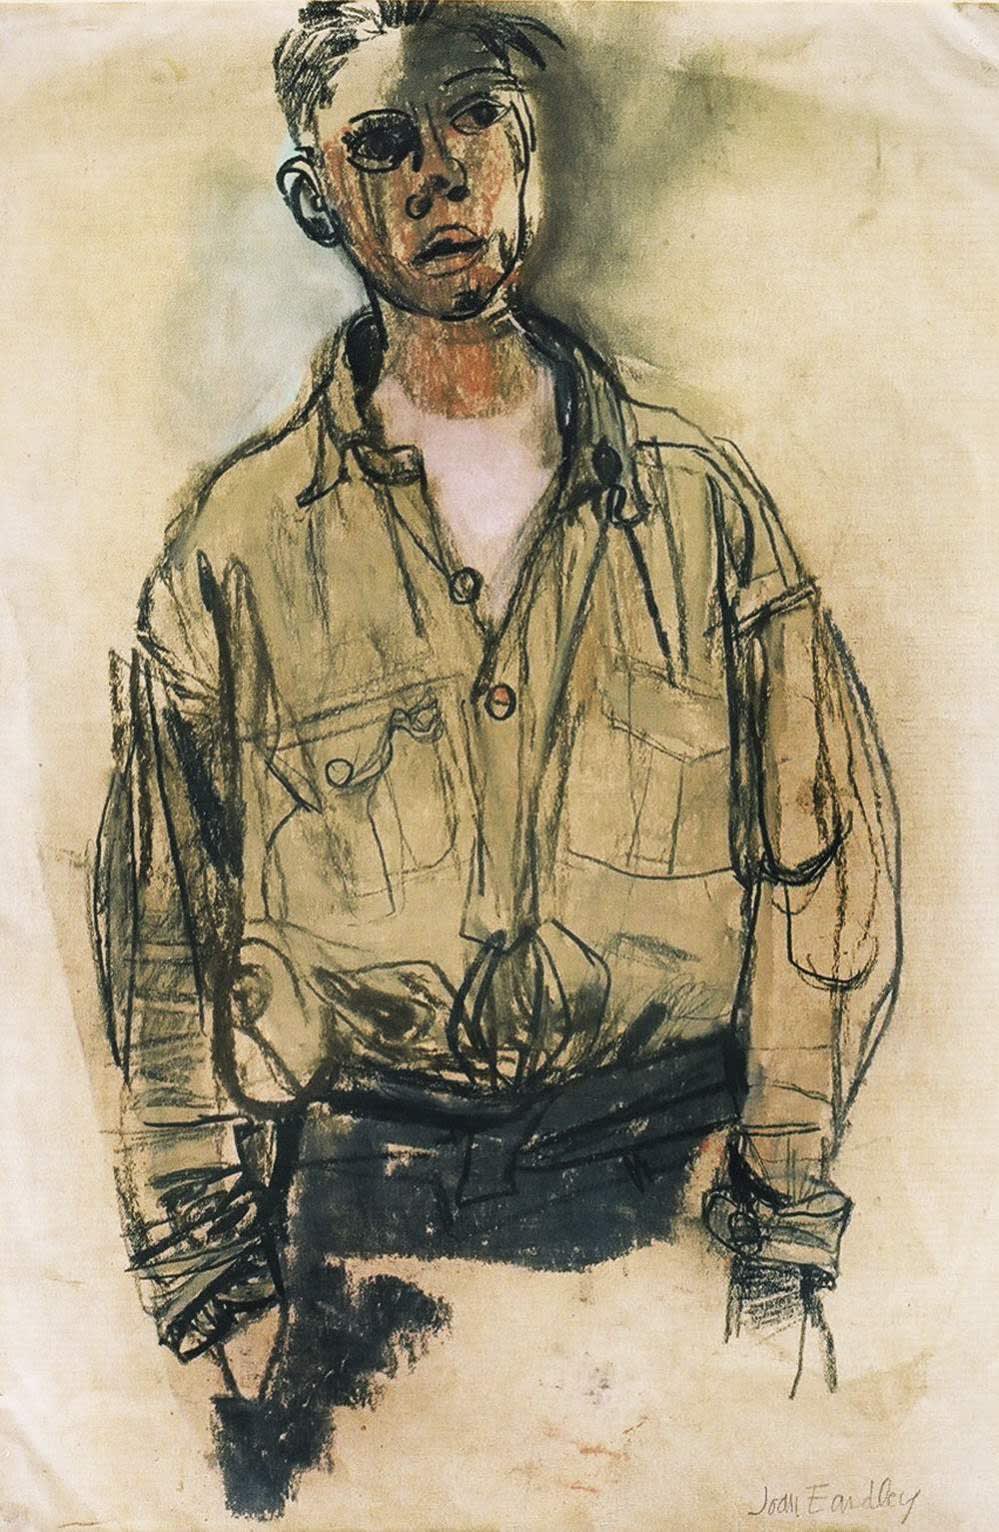 Joan Eardley (1921-1963) The Khaki Shirt n.d. Pastel on paper 28.5 x 19.5 cm Gracefield Arts Centre, Dumfries To see and discover more about this artist click here